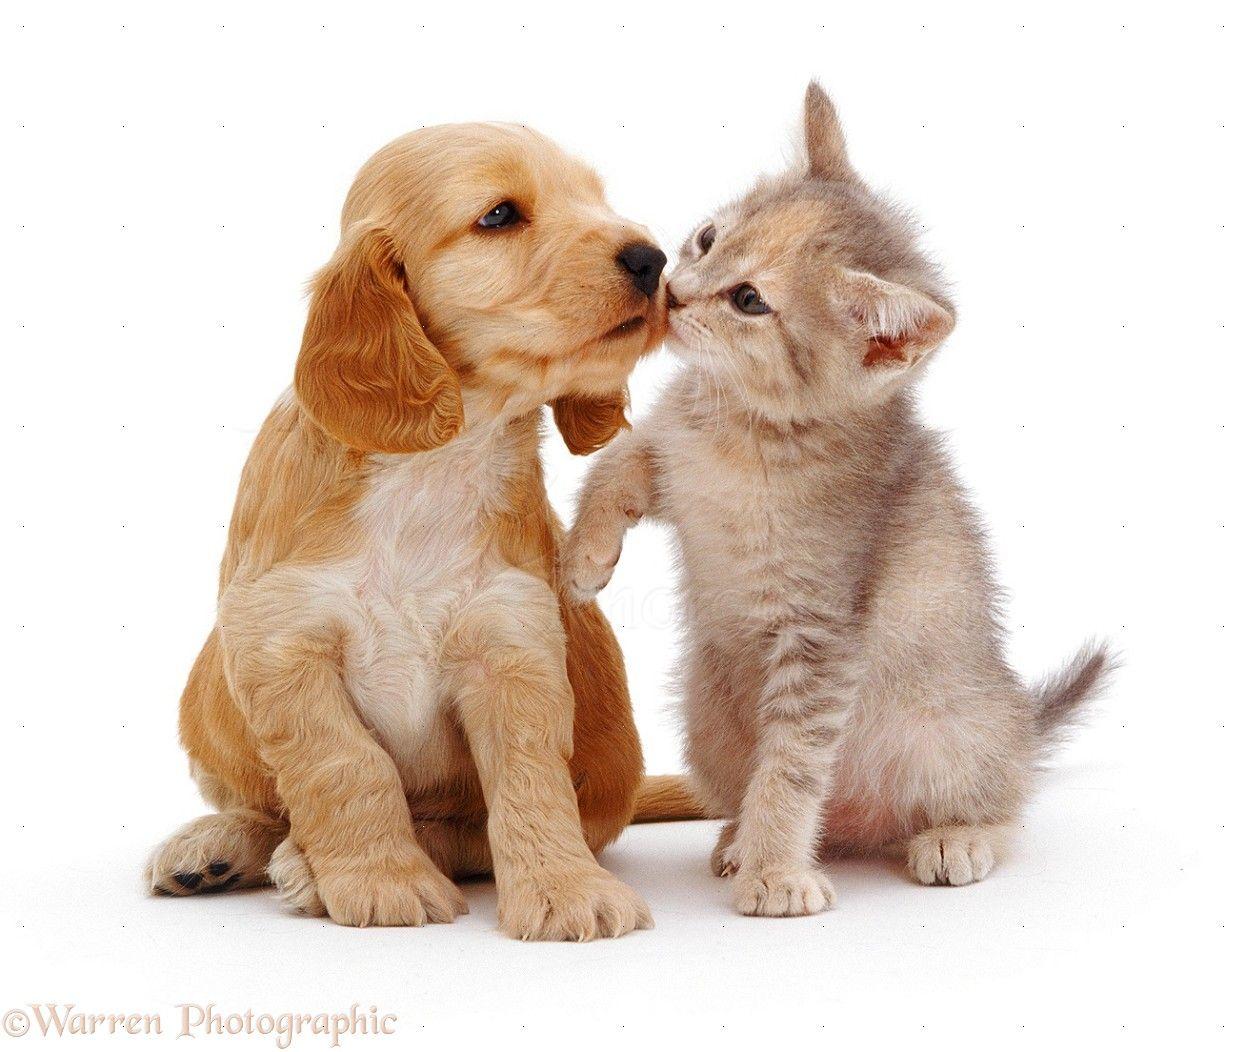 Puppy And Kitten Wallpaper, image collections of wallpaper